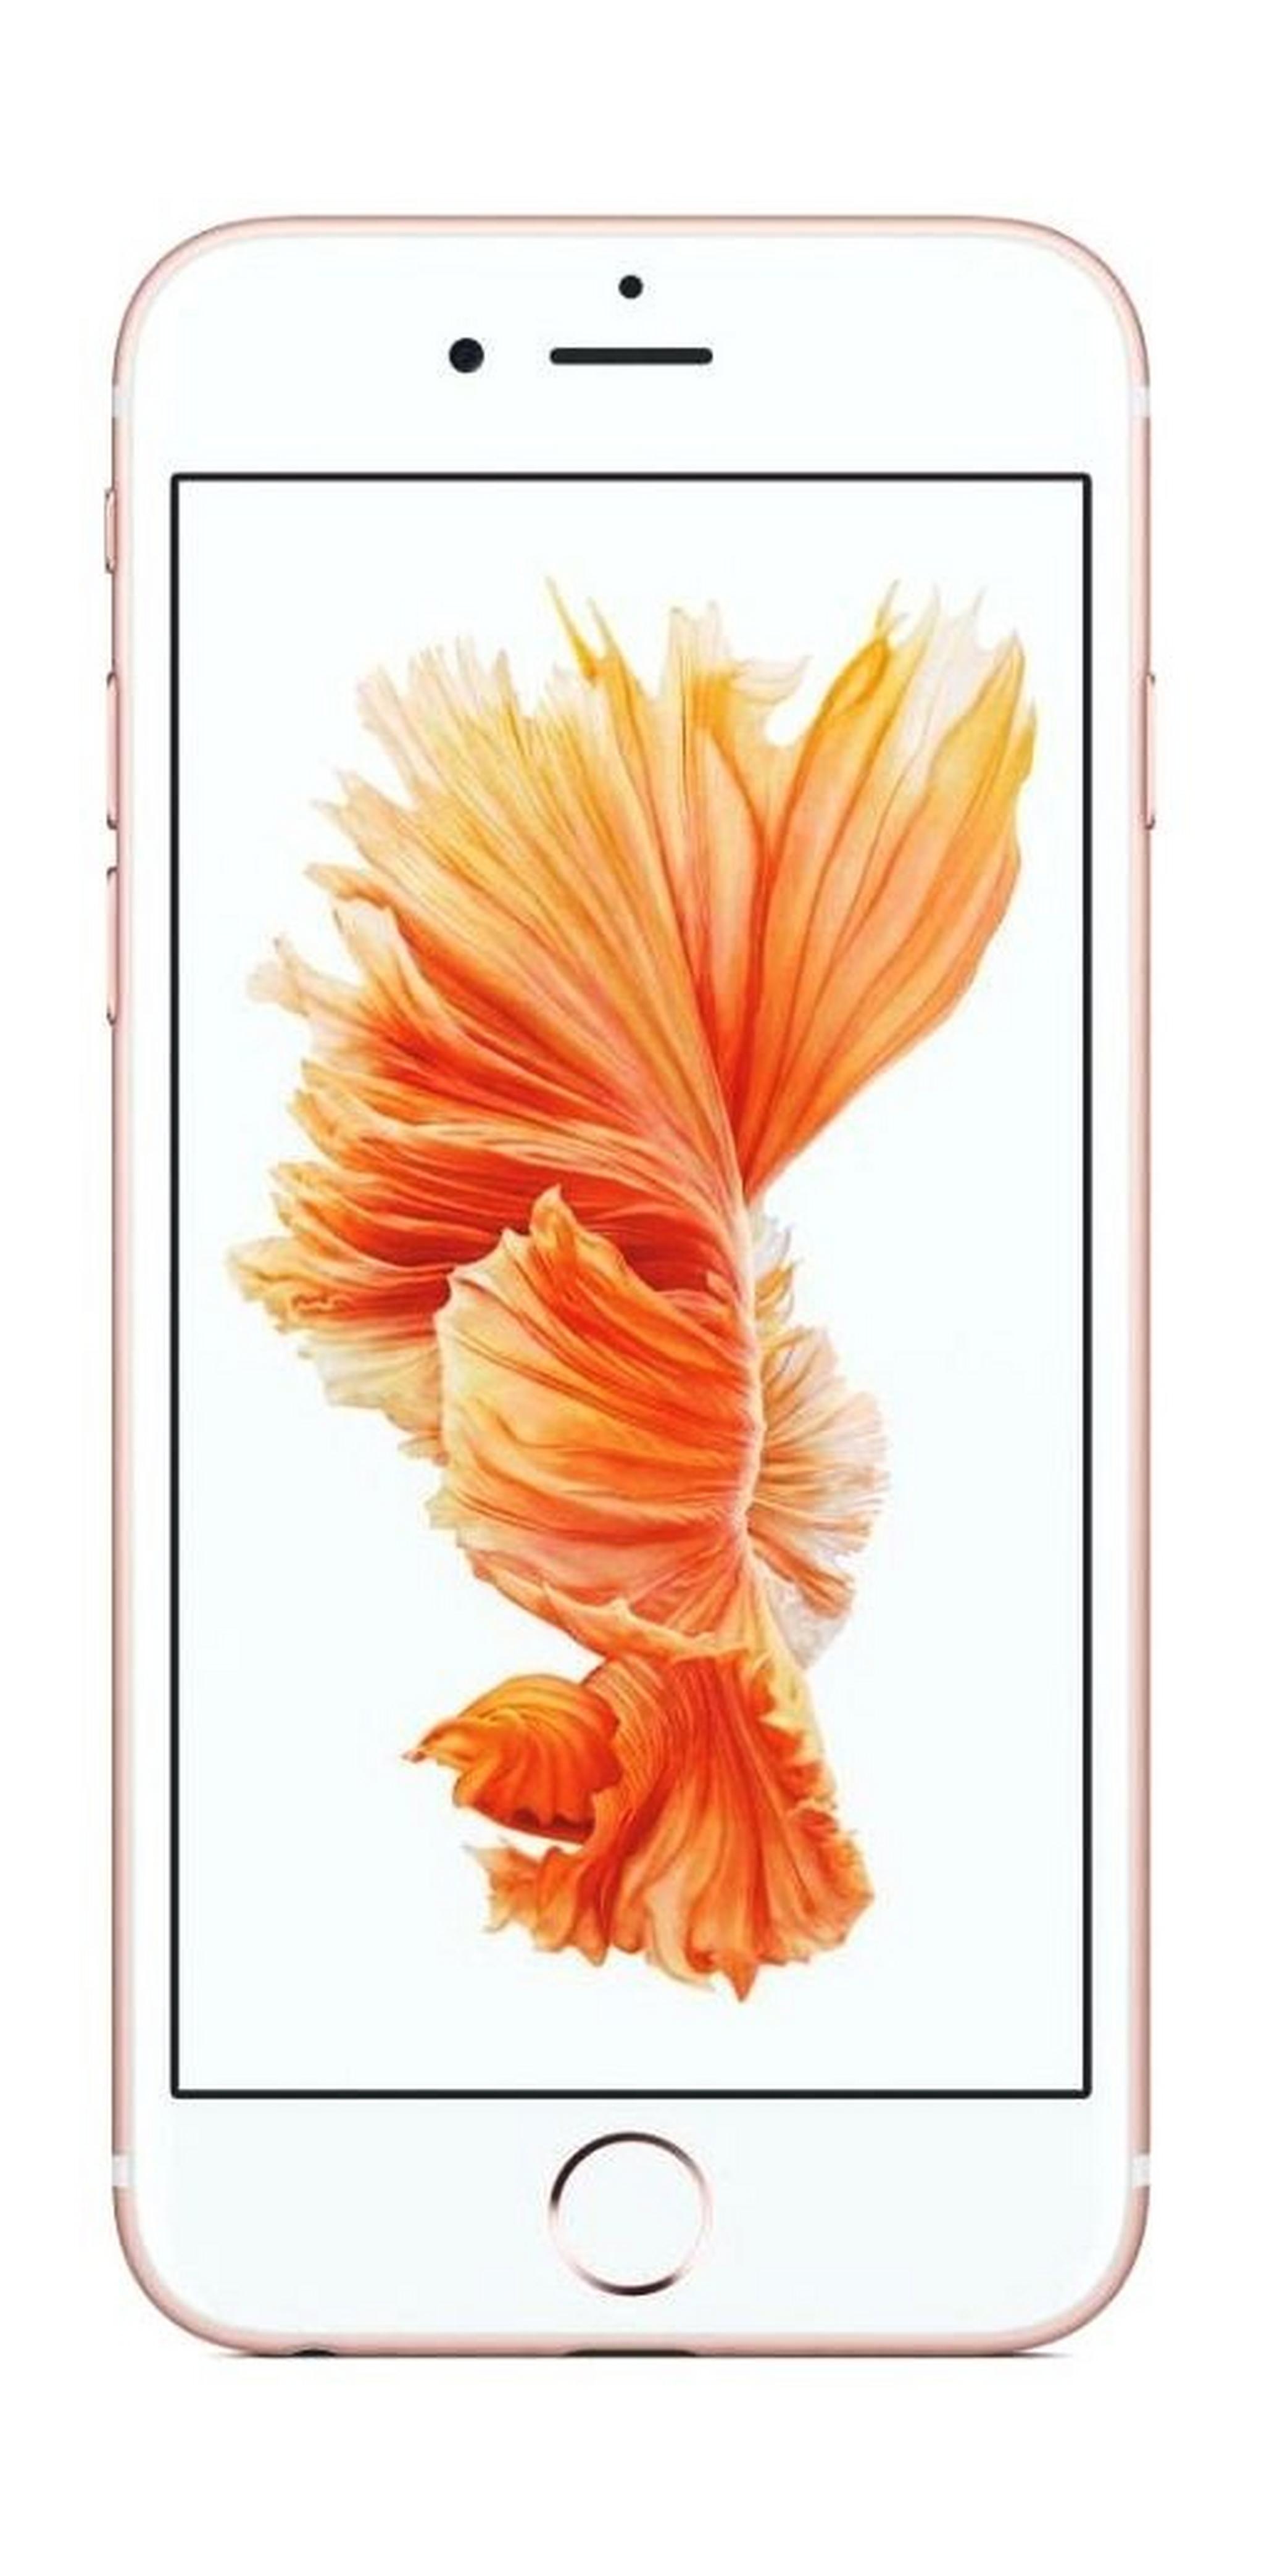 Apple iPhone 6S 64GB 12MP 4G LTE 4.7-inch Smartphone - Rose Gold